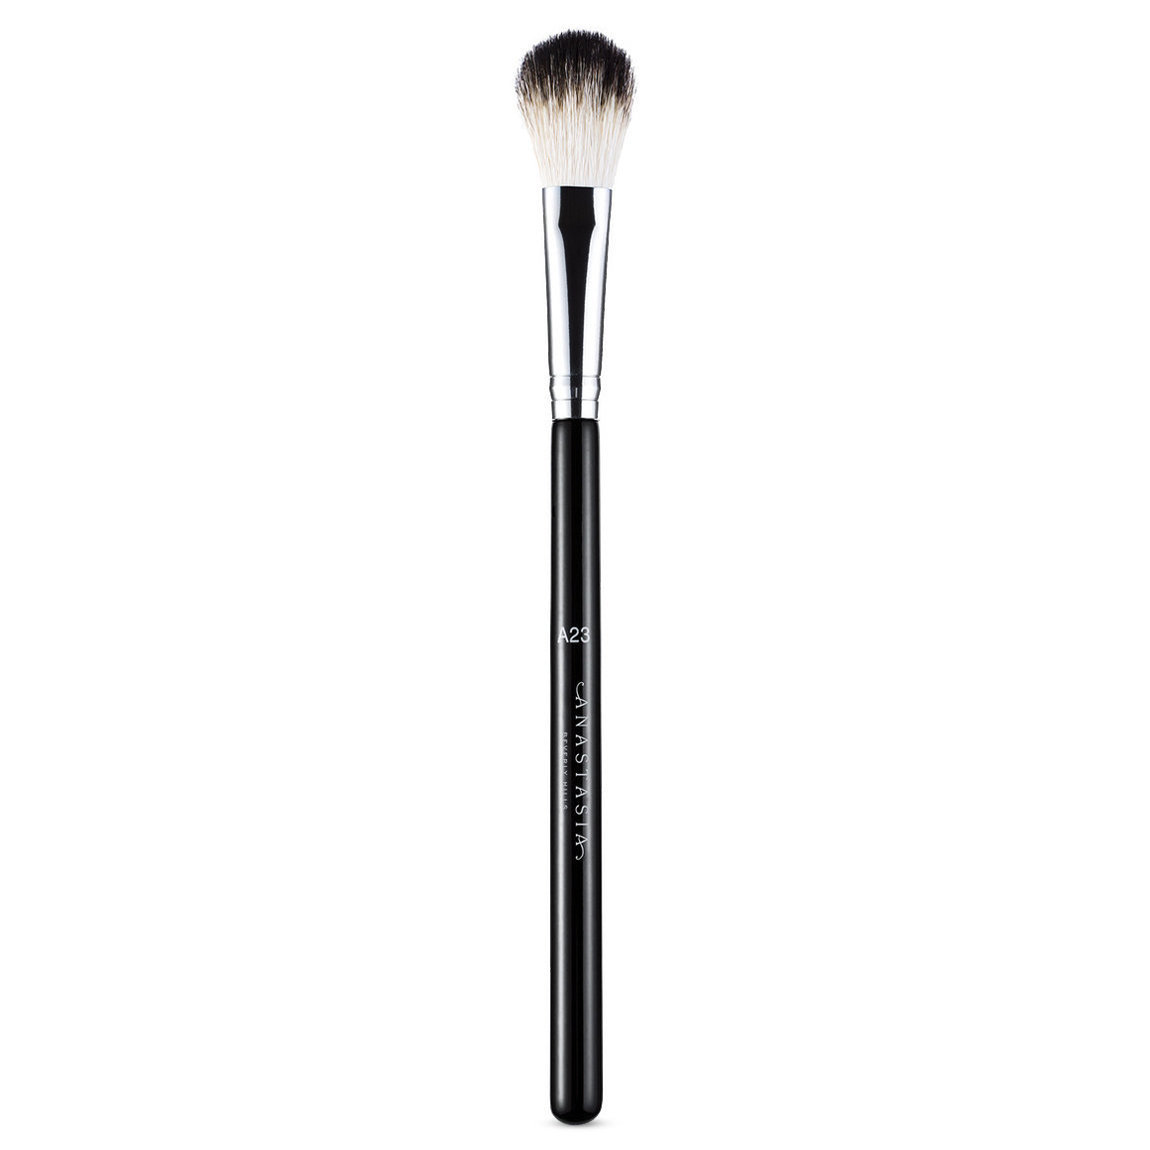 Anastasia Beverly Hills A23 Pro Brush - Large Tapered Blending Brush alternative view 1 - product swatch.